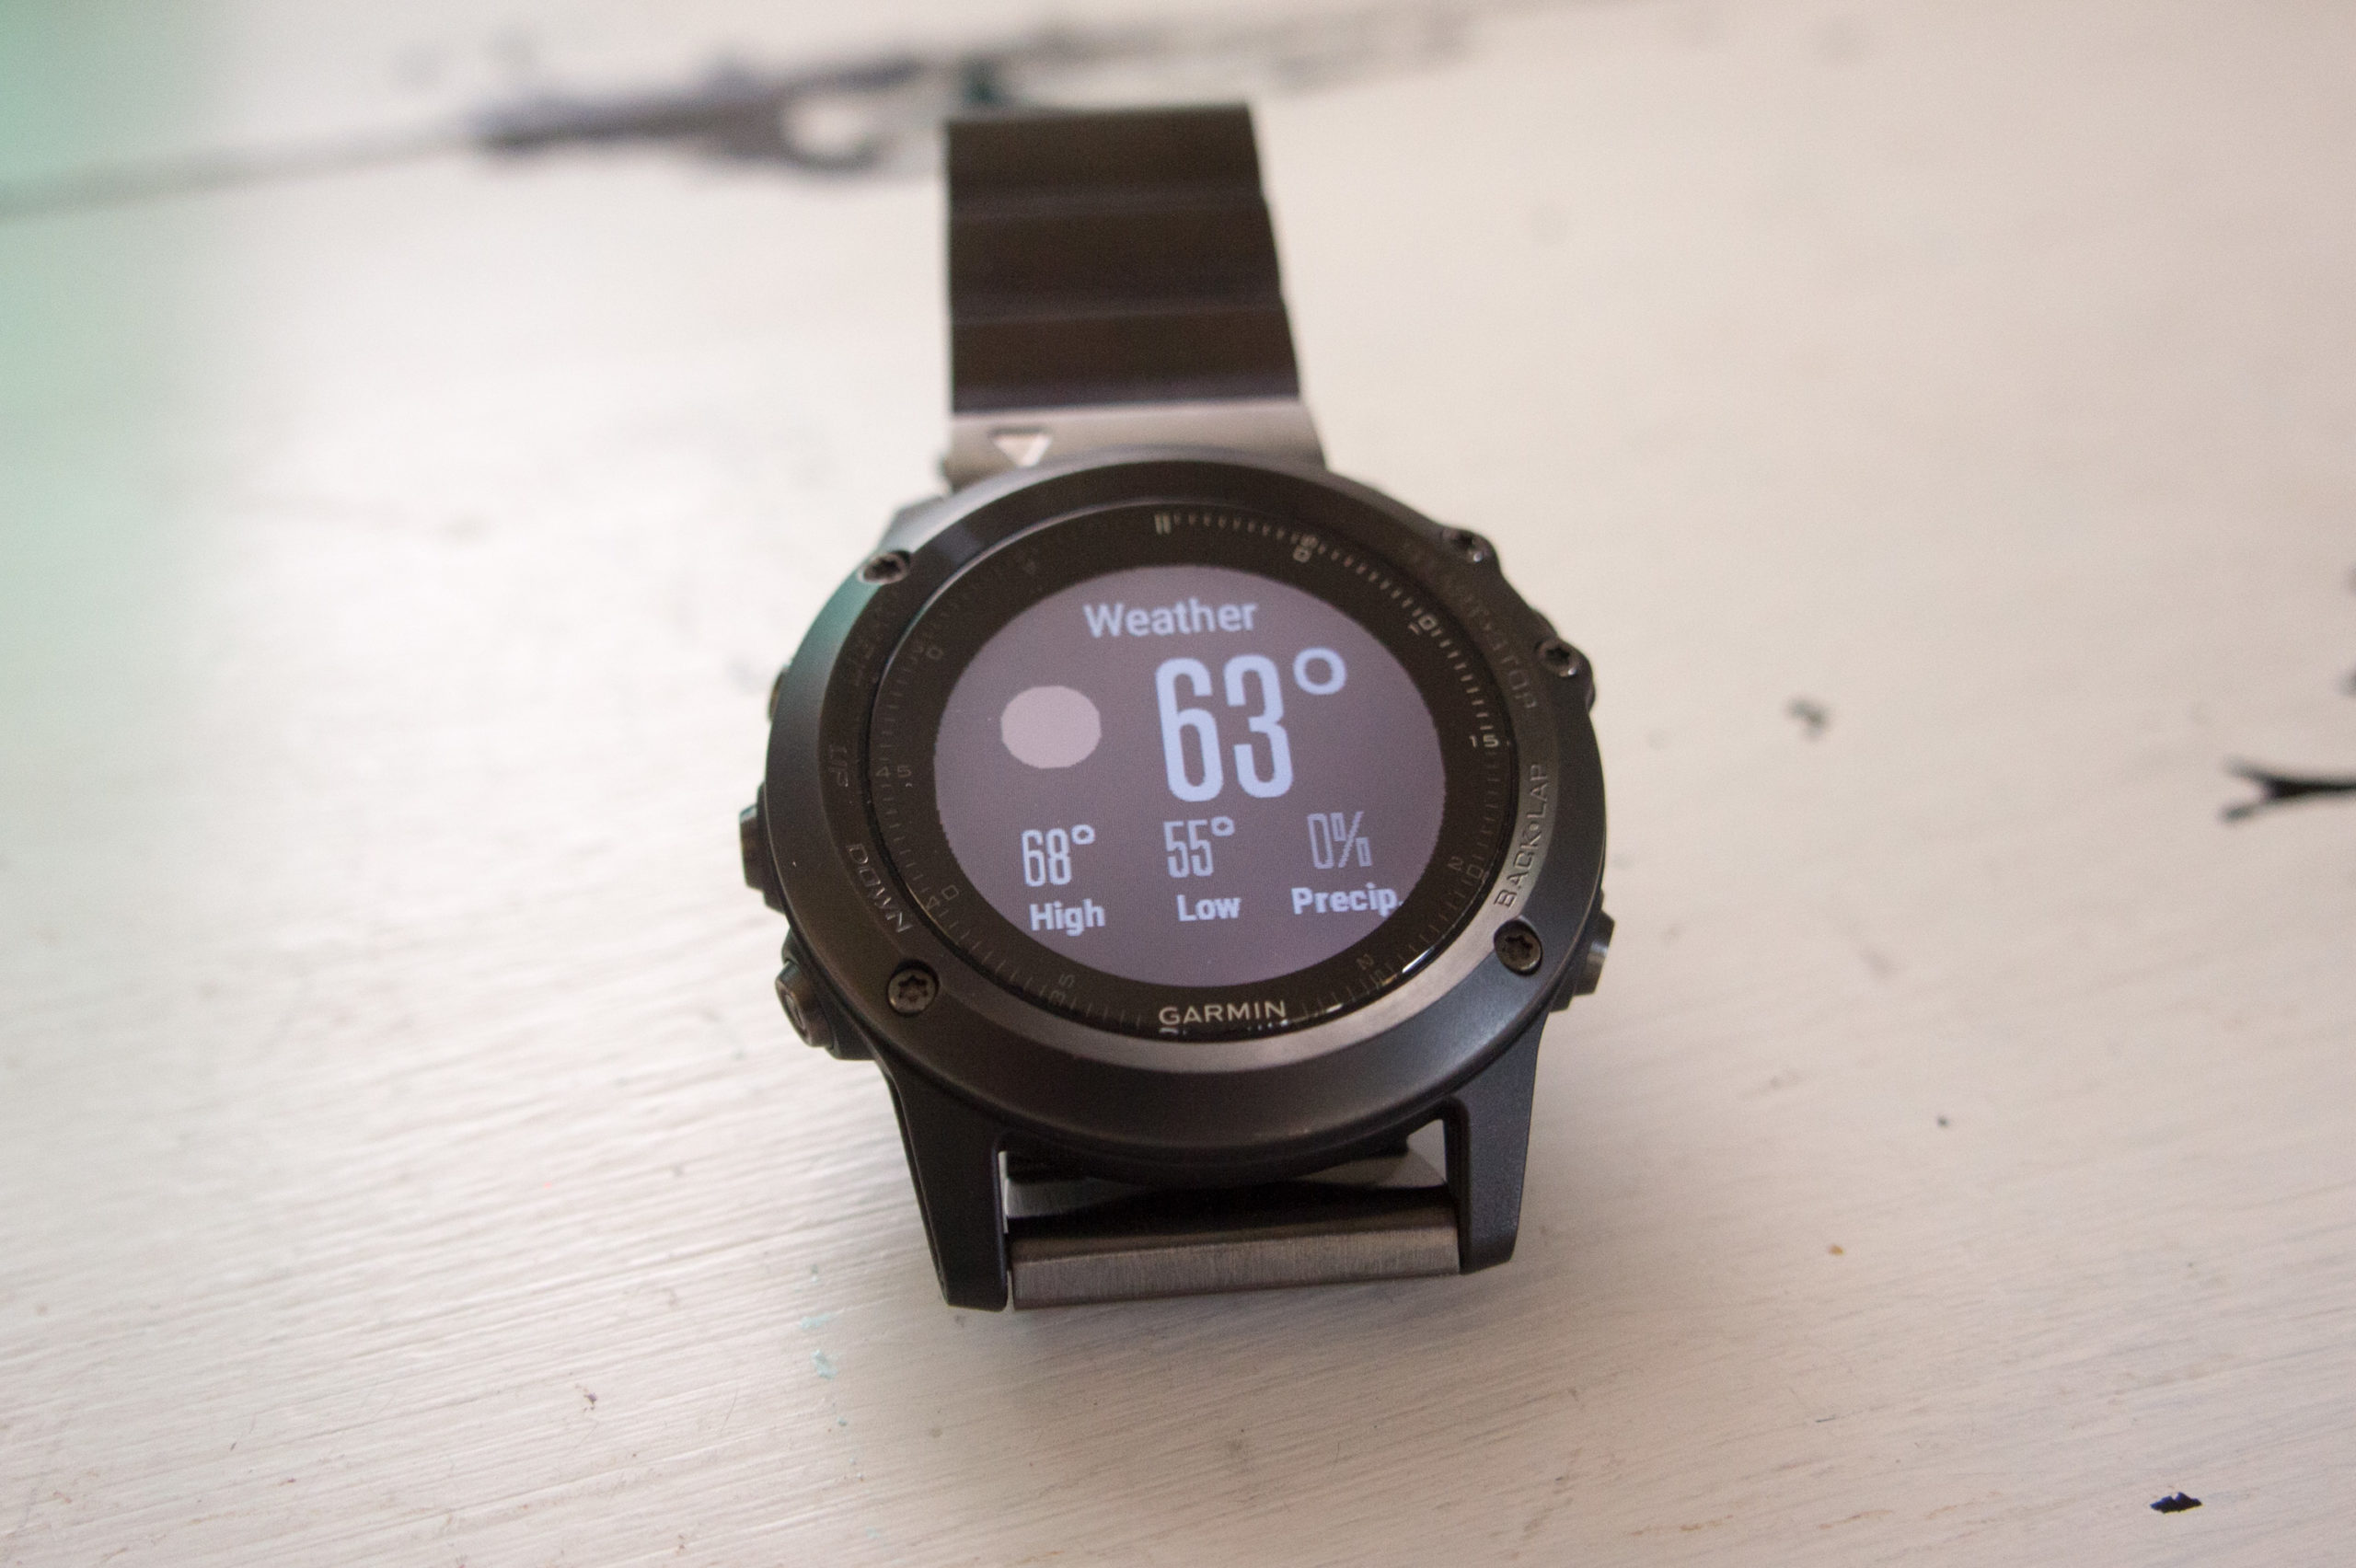 Garmin Fenix 3 Watch Review: The Smartwatch For Outdoor Athletes